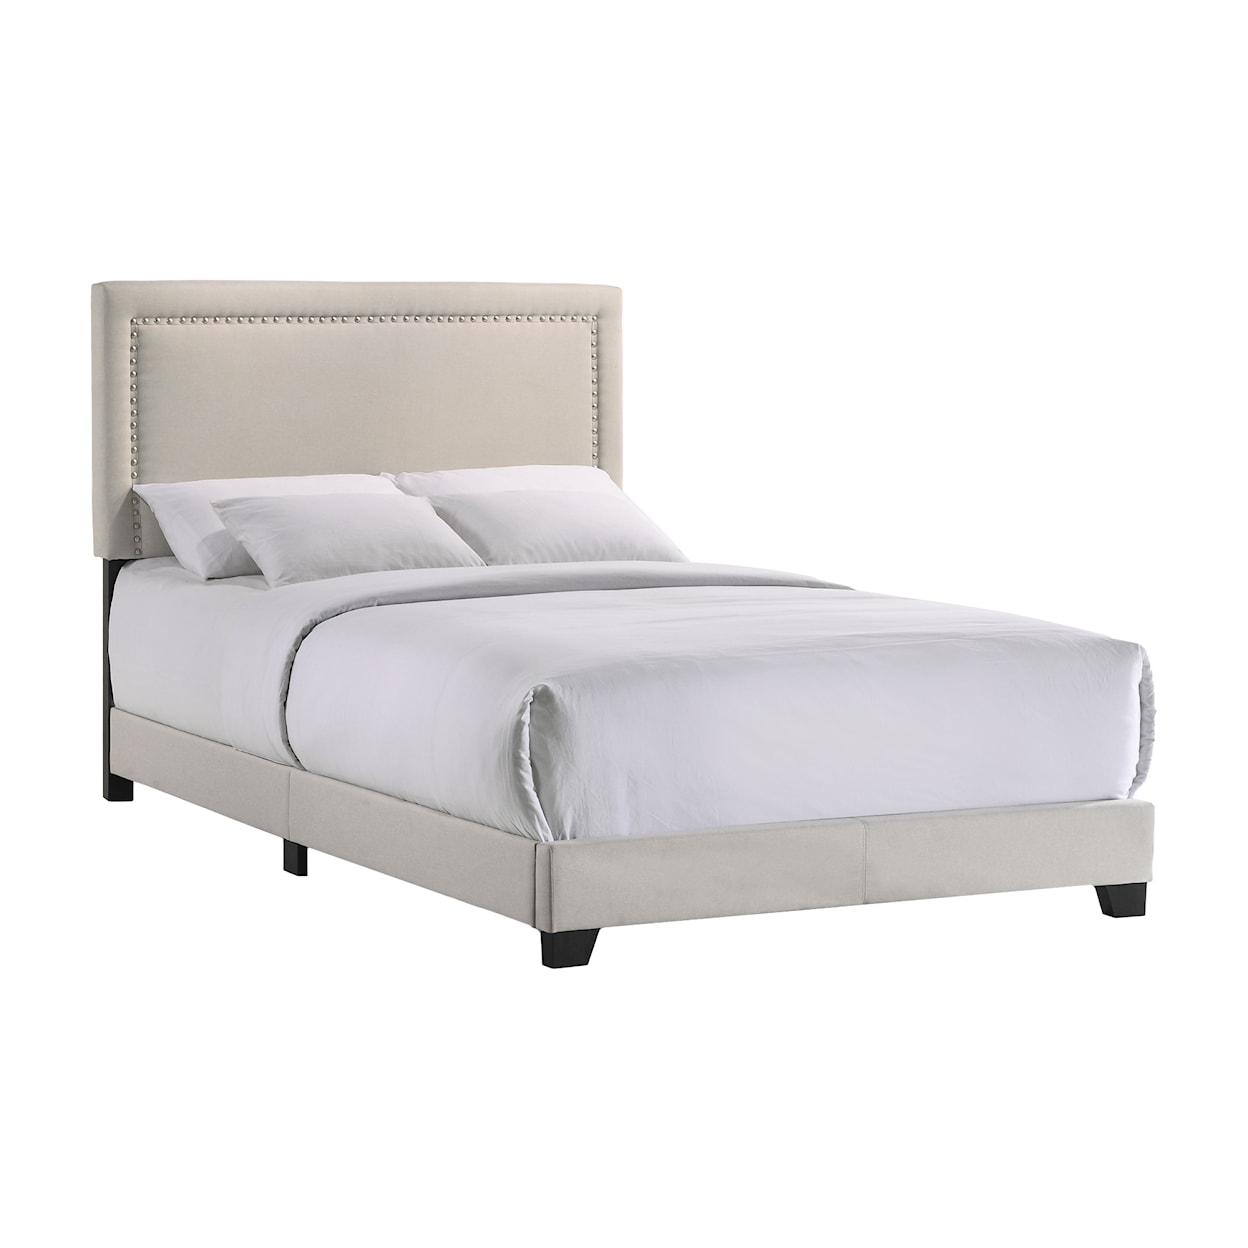 Intercon Upholstered Beds Zion Full Upholstered Bed